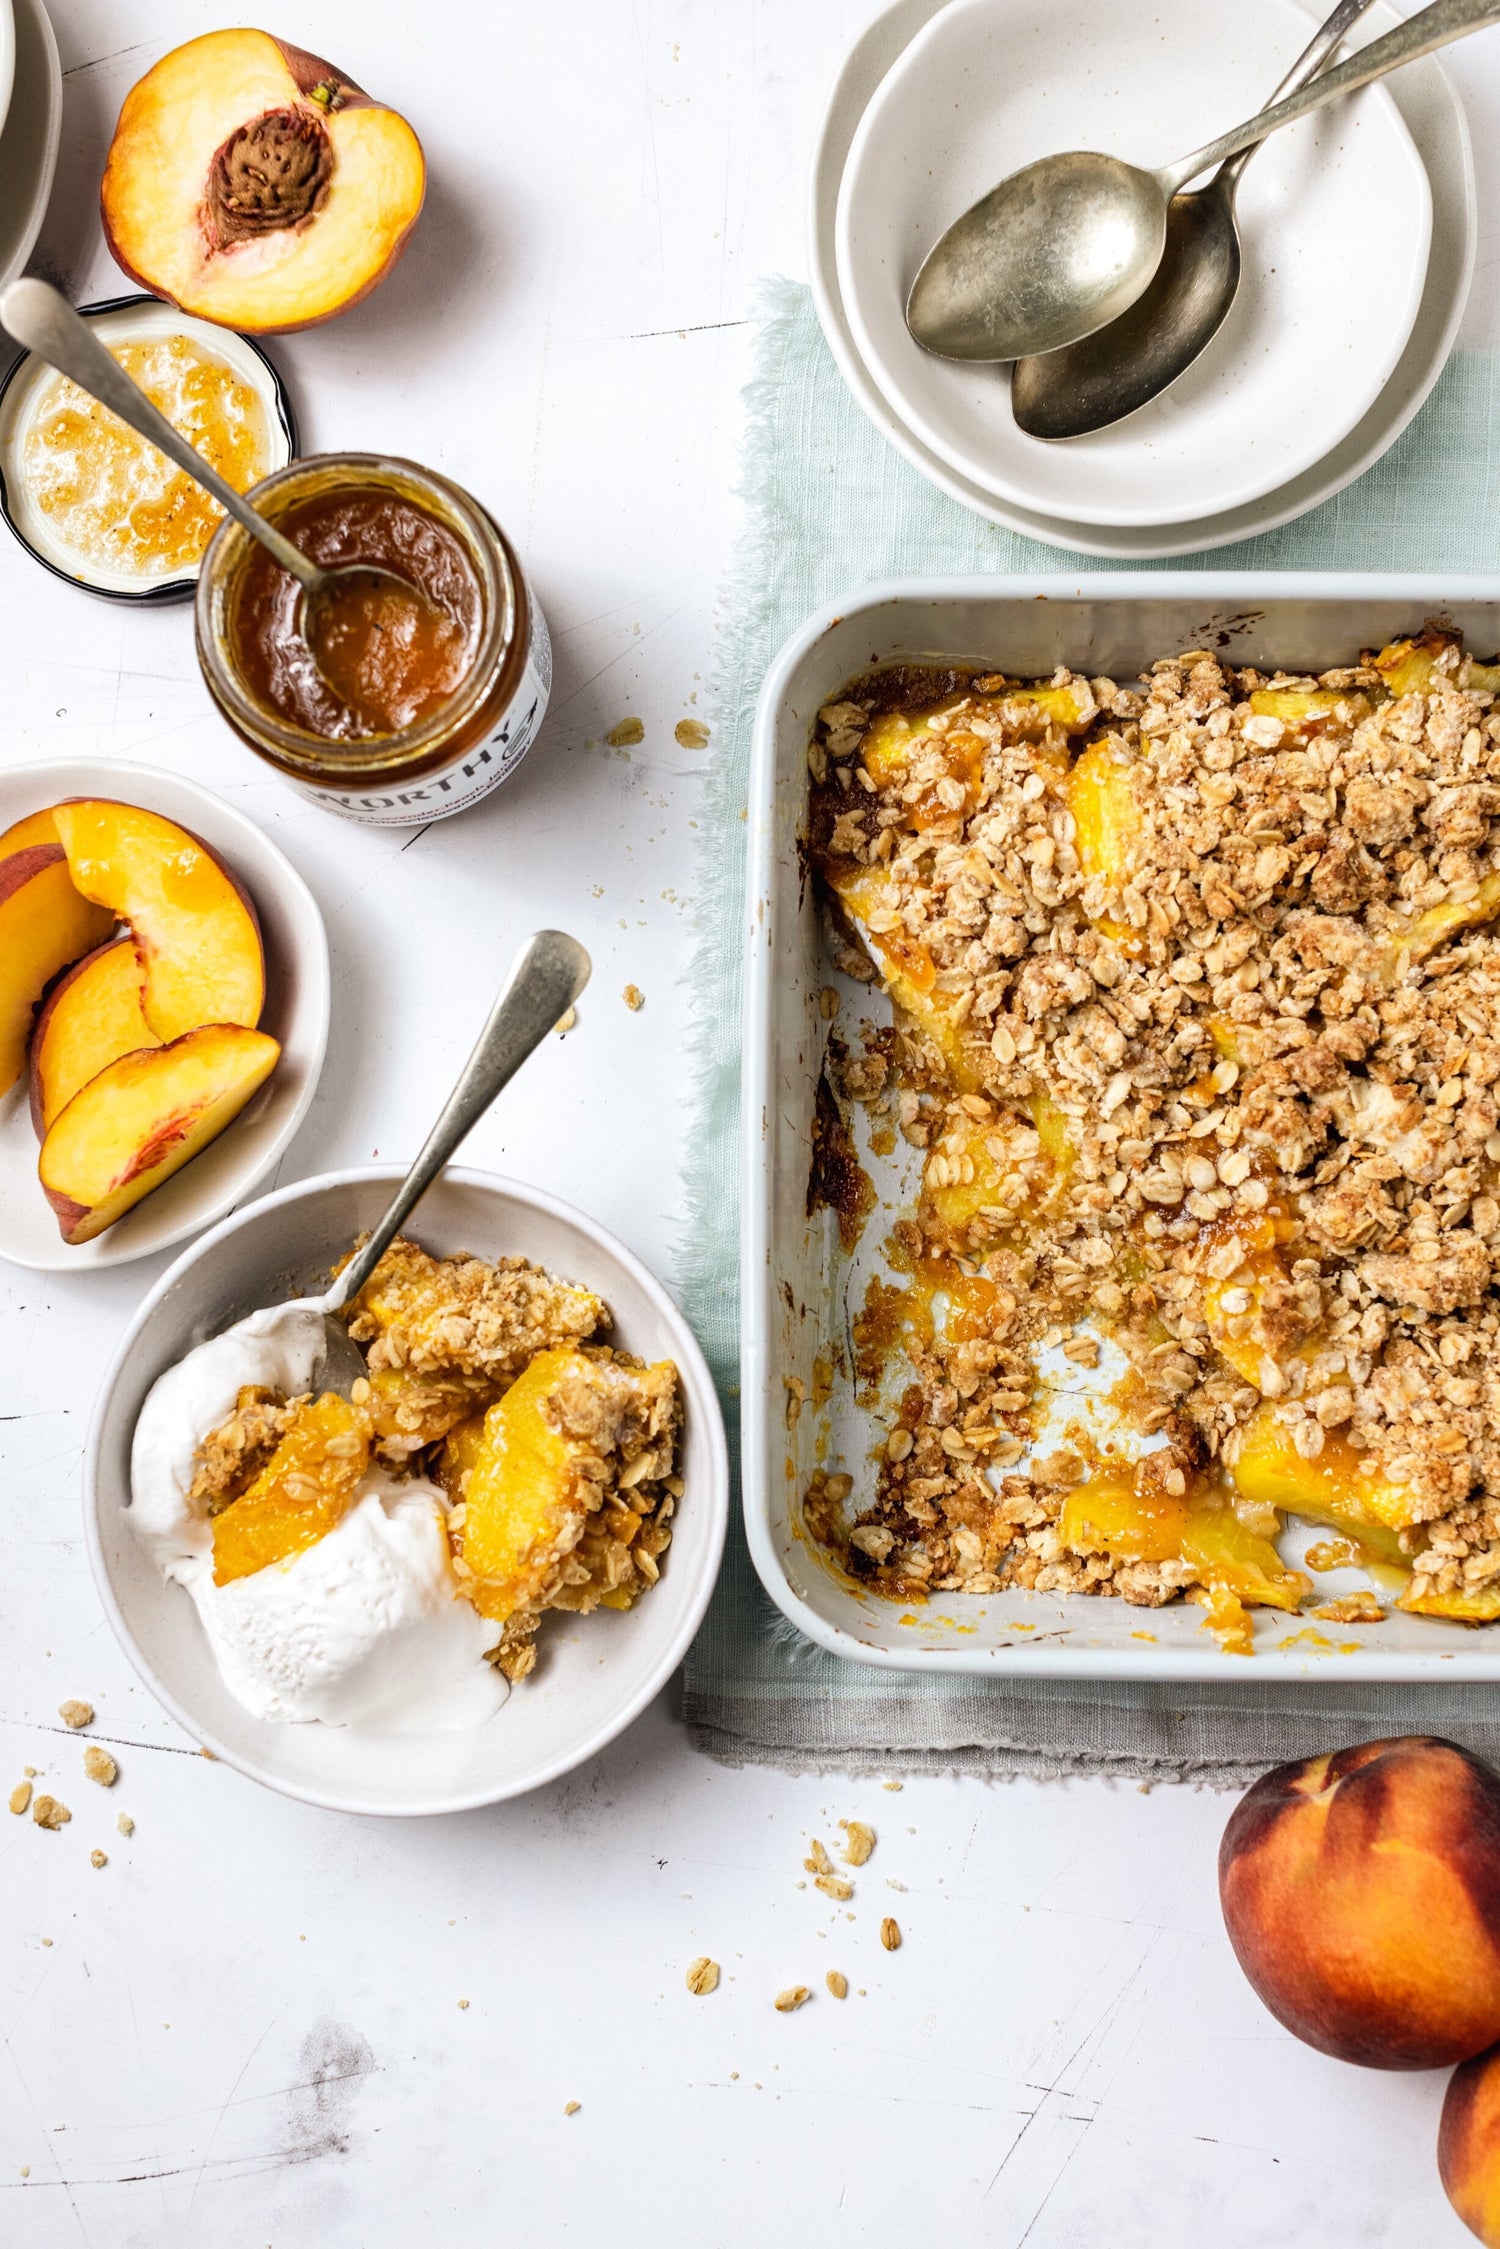 A tray of baked peach crisp with Worthy’s Earl Grey Lavender jam filling next to a portion of the crisp in a bowl with vanilla ice cream.